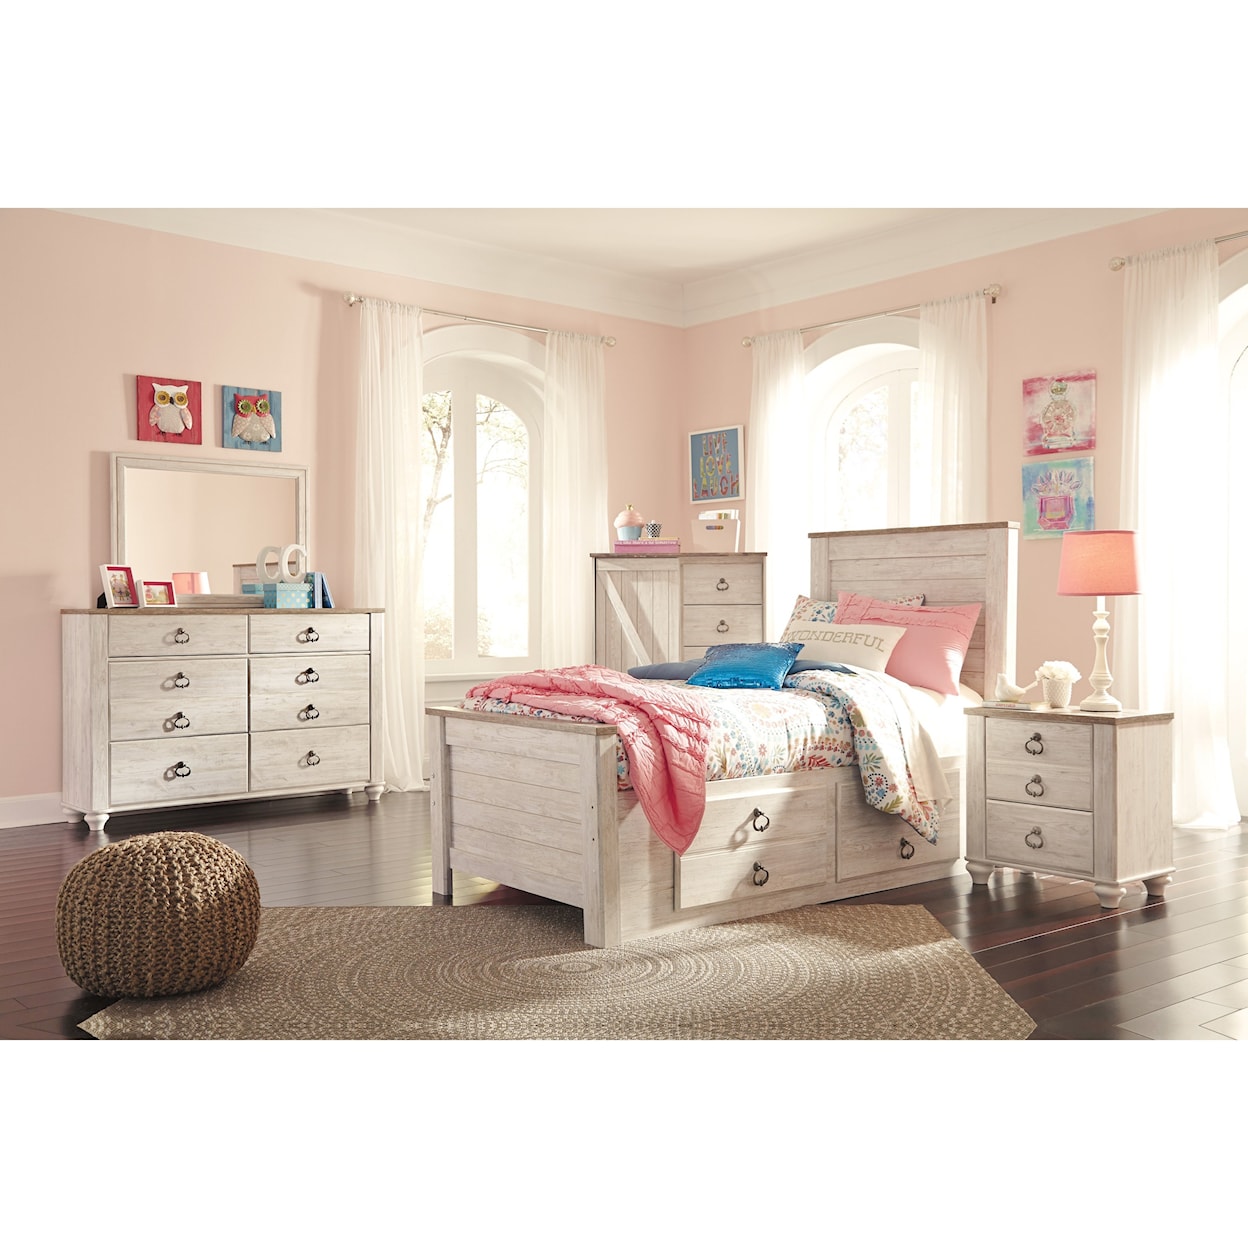 Signature Design by Ashley Furniture Willowton Twin Bed with Underbed Storage Drawers